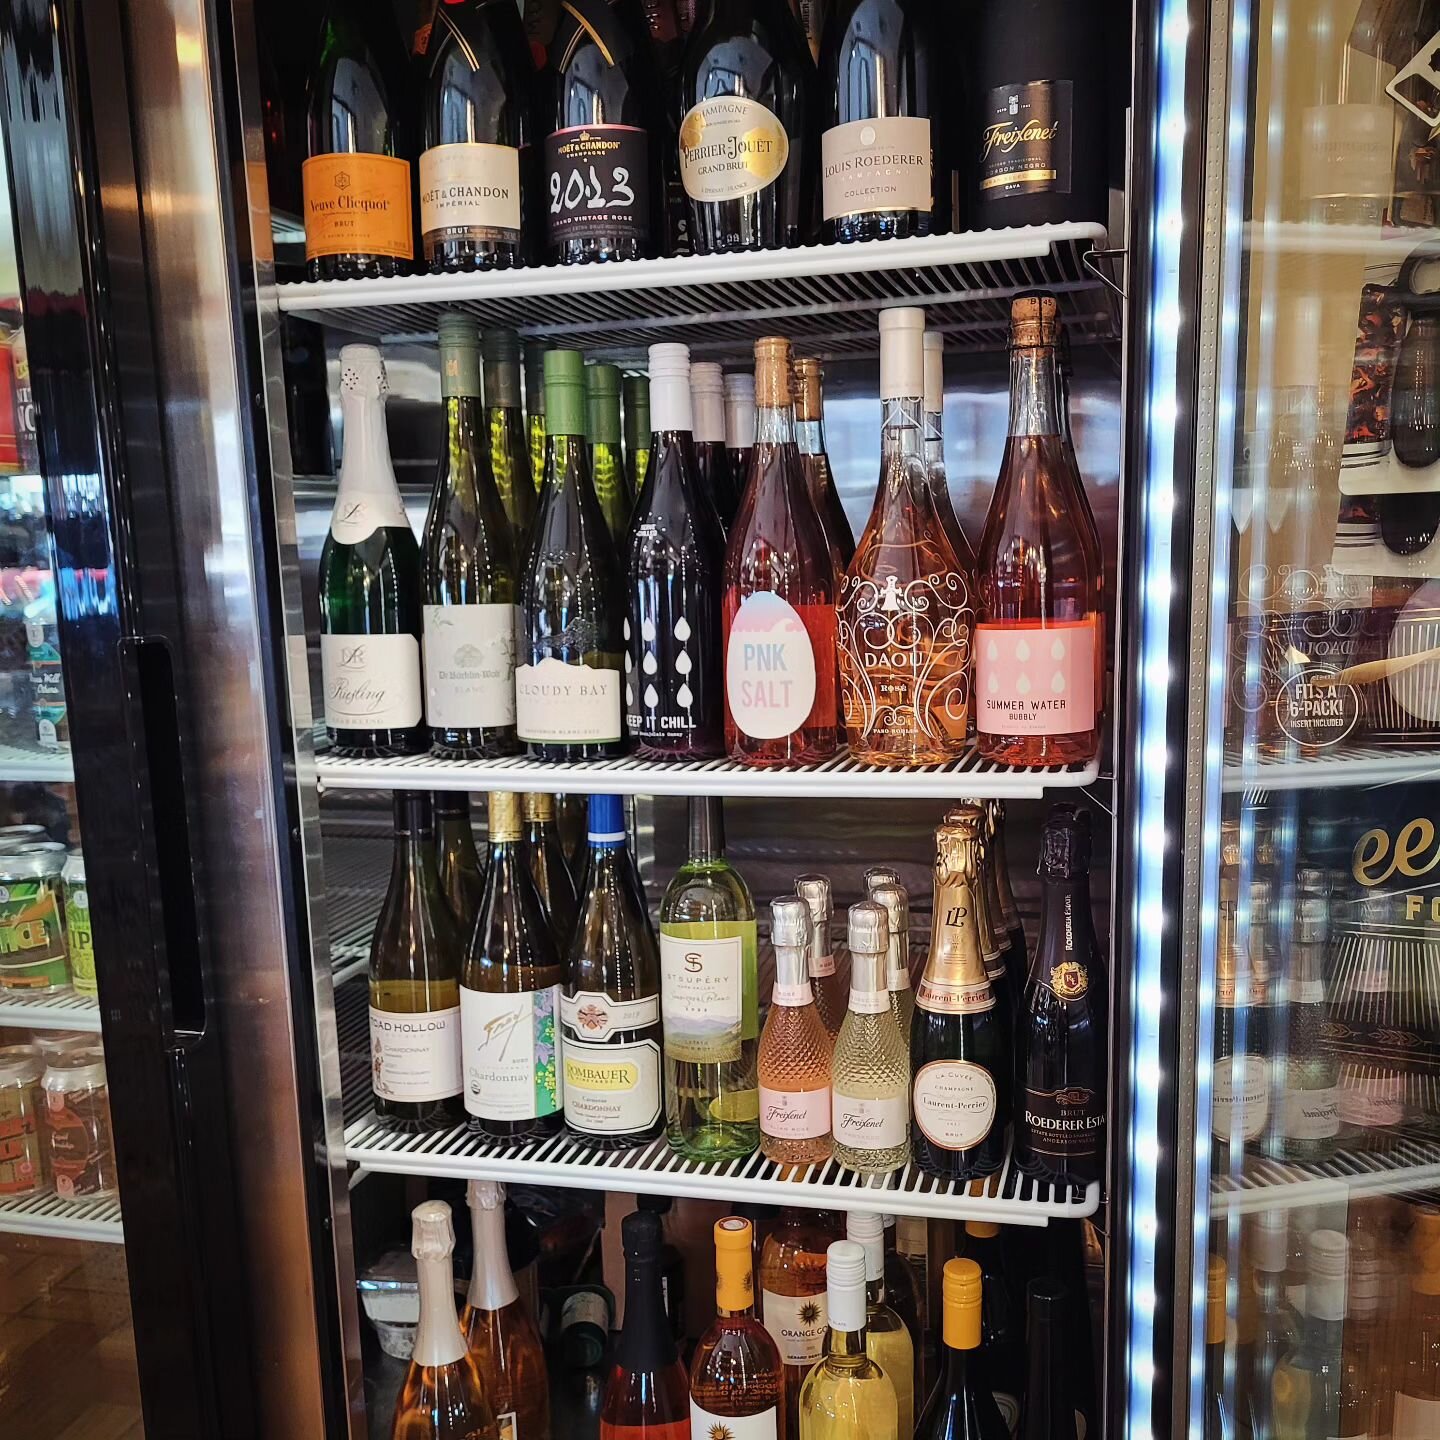 With so many people still out of power, we thought it might be a good idea to let everyone know that we have wines chilled in our fridge. If you're sitting in the dark this evening, stop by and grab a wine for yourself. Don't drink room temperature w